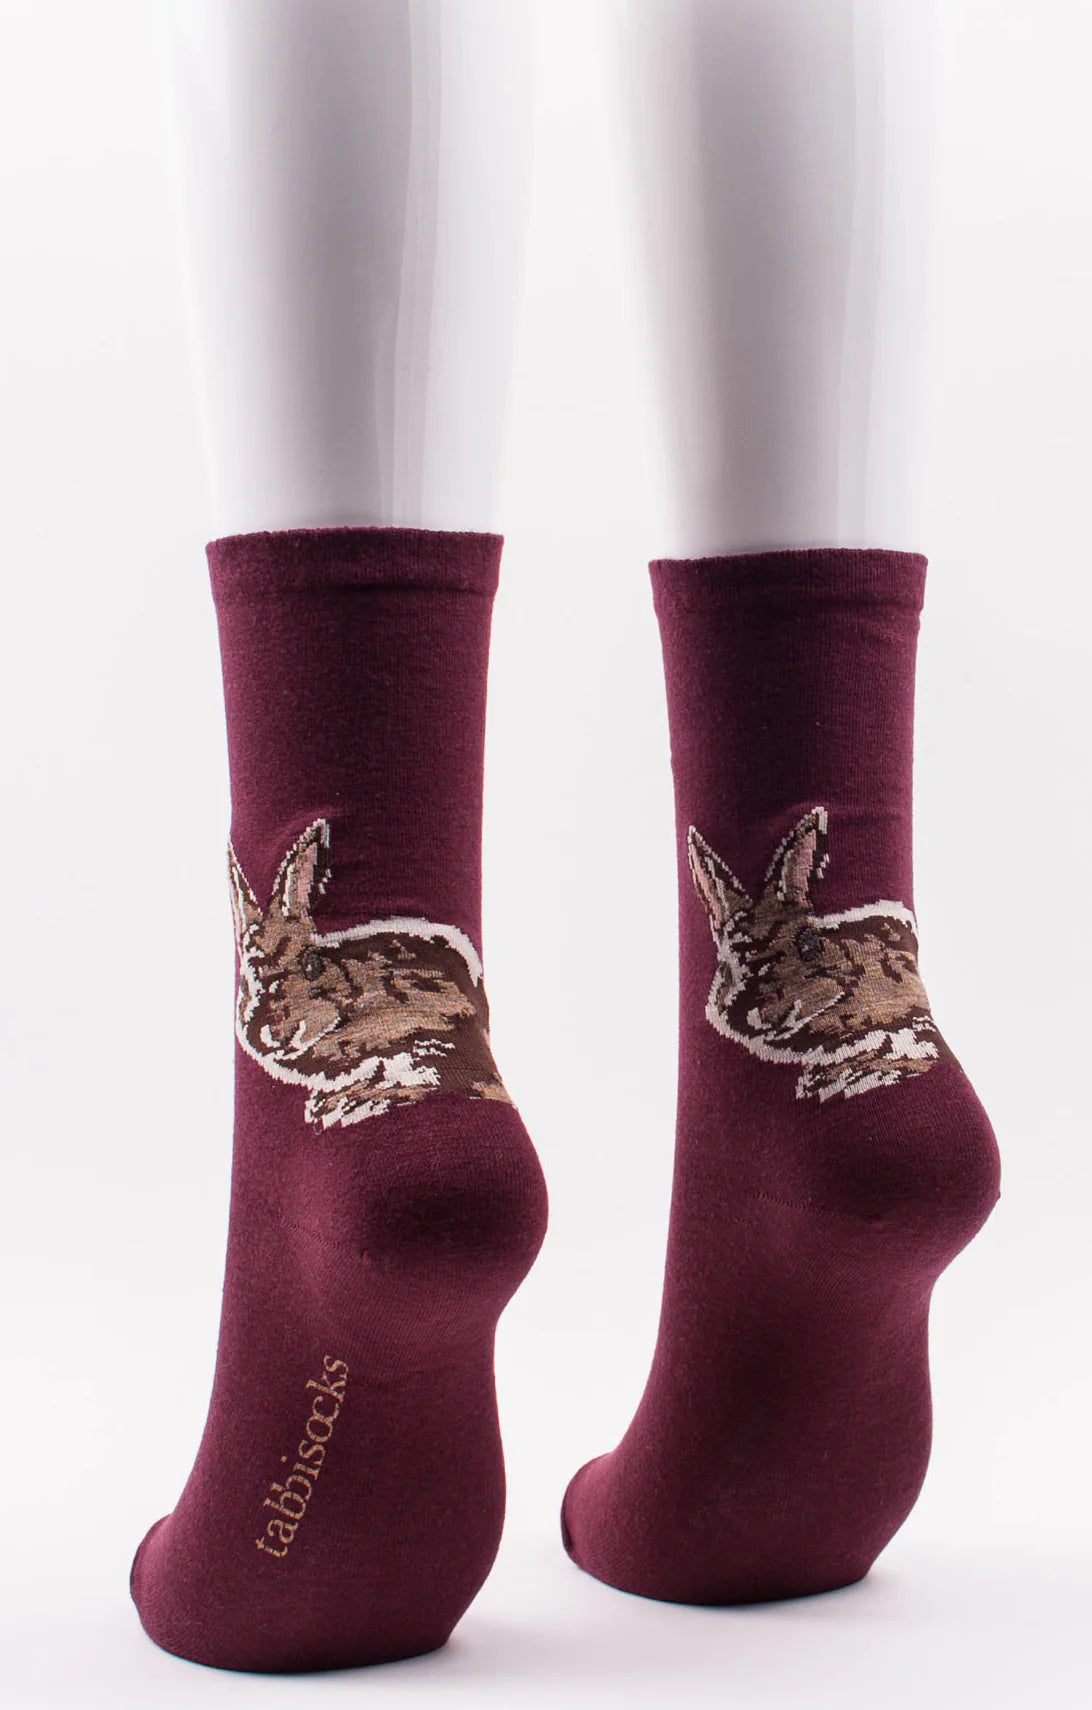 This is a photo of Tabbisocks' product name Animal Rescue Pairs "Bunny Rabbit" Socks Merlot